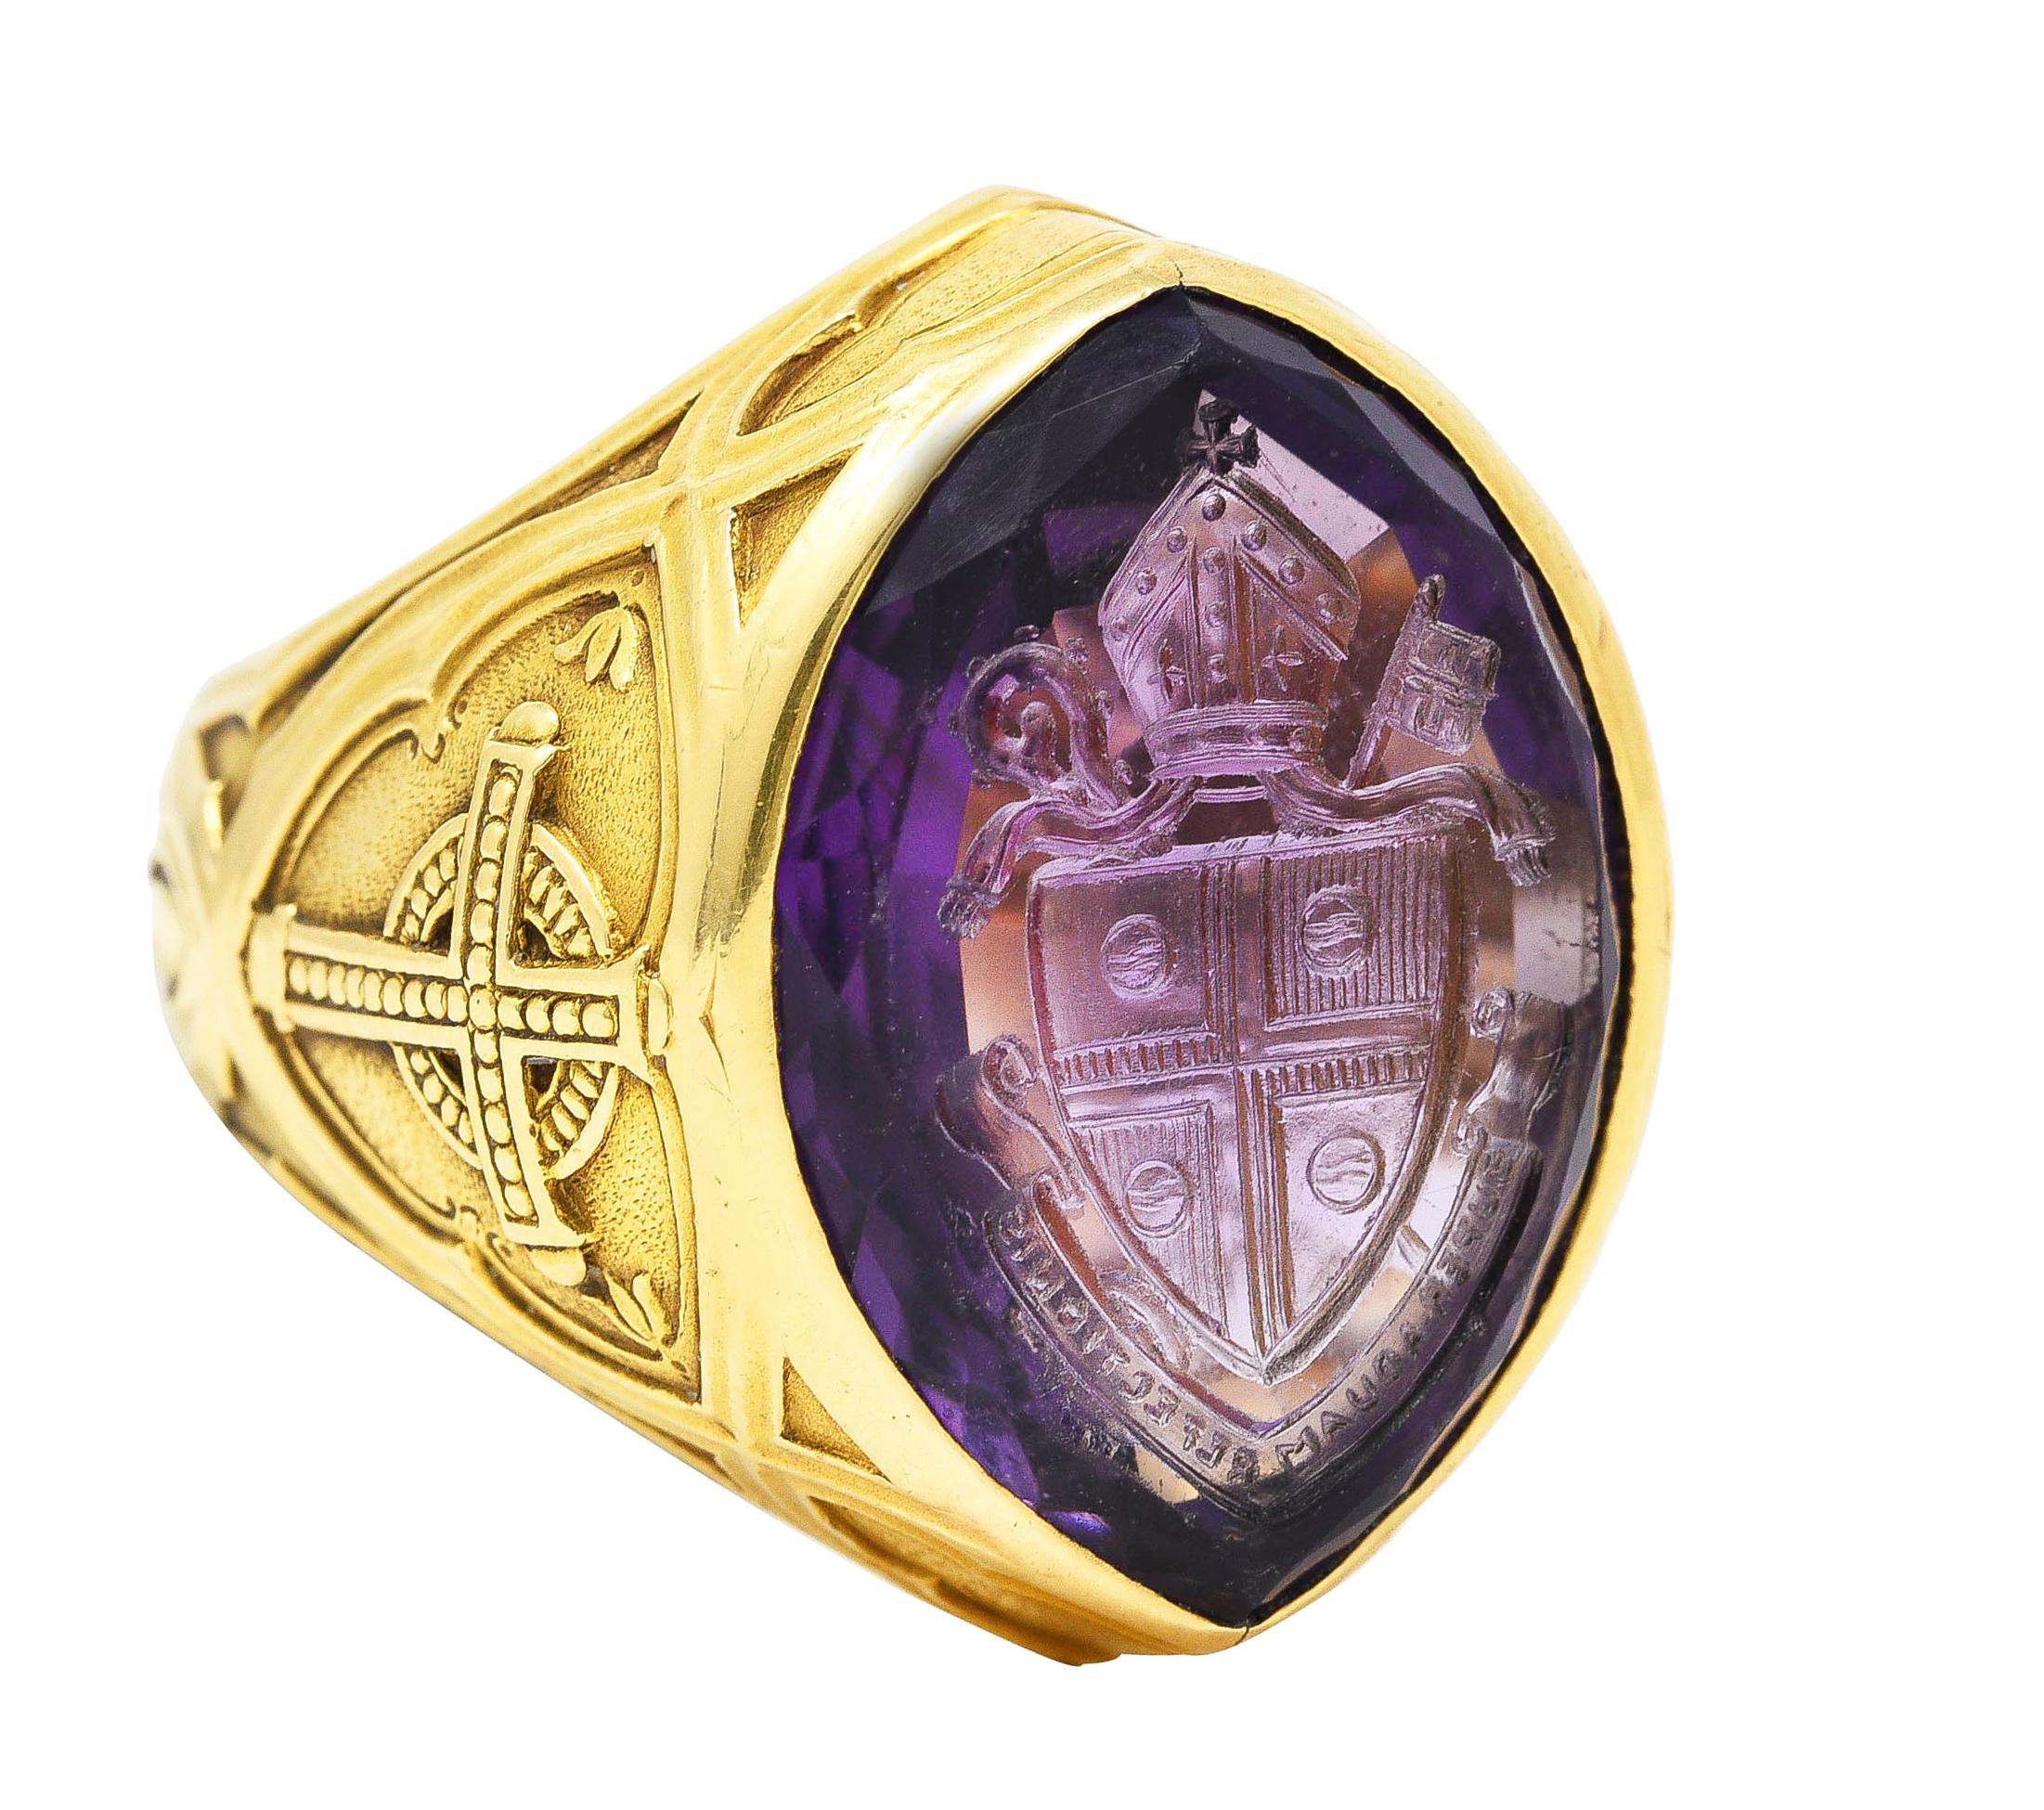 Centering a mixed cut navette shaped amethyst cabochon carved with an intaglio depicting a bishop's seal. With a bishop's headdress, shield, and banner with the Latin words 'Svper Aquam Refectionis'. Translating to 'By The Water of Refreshment' -